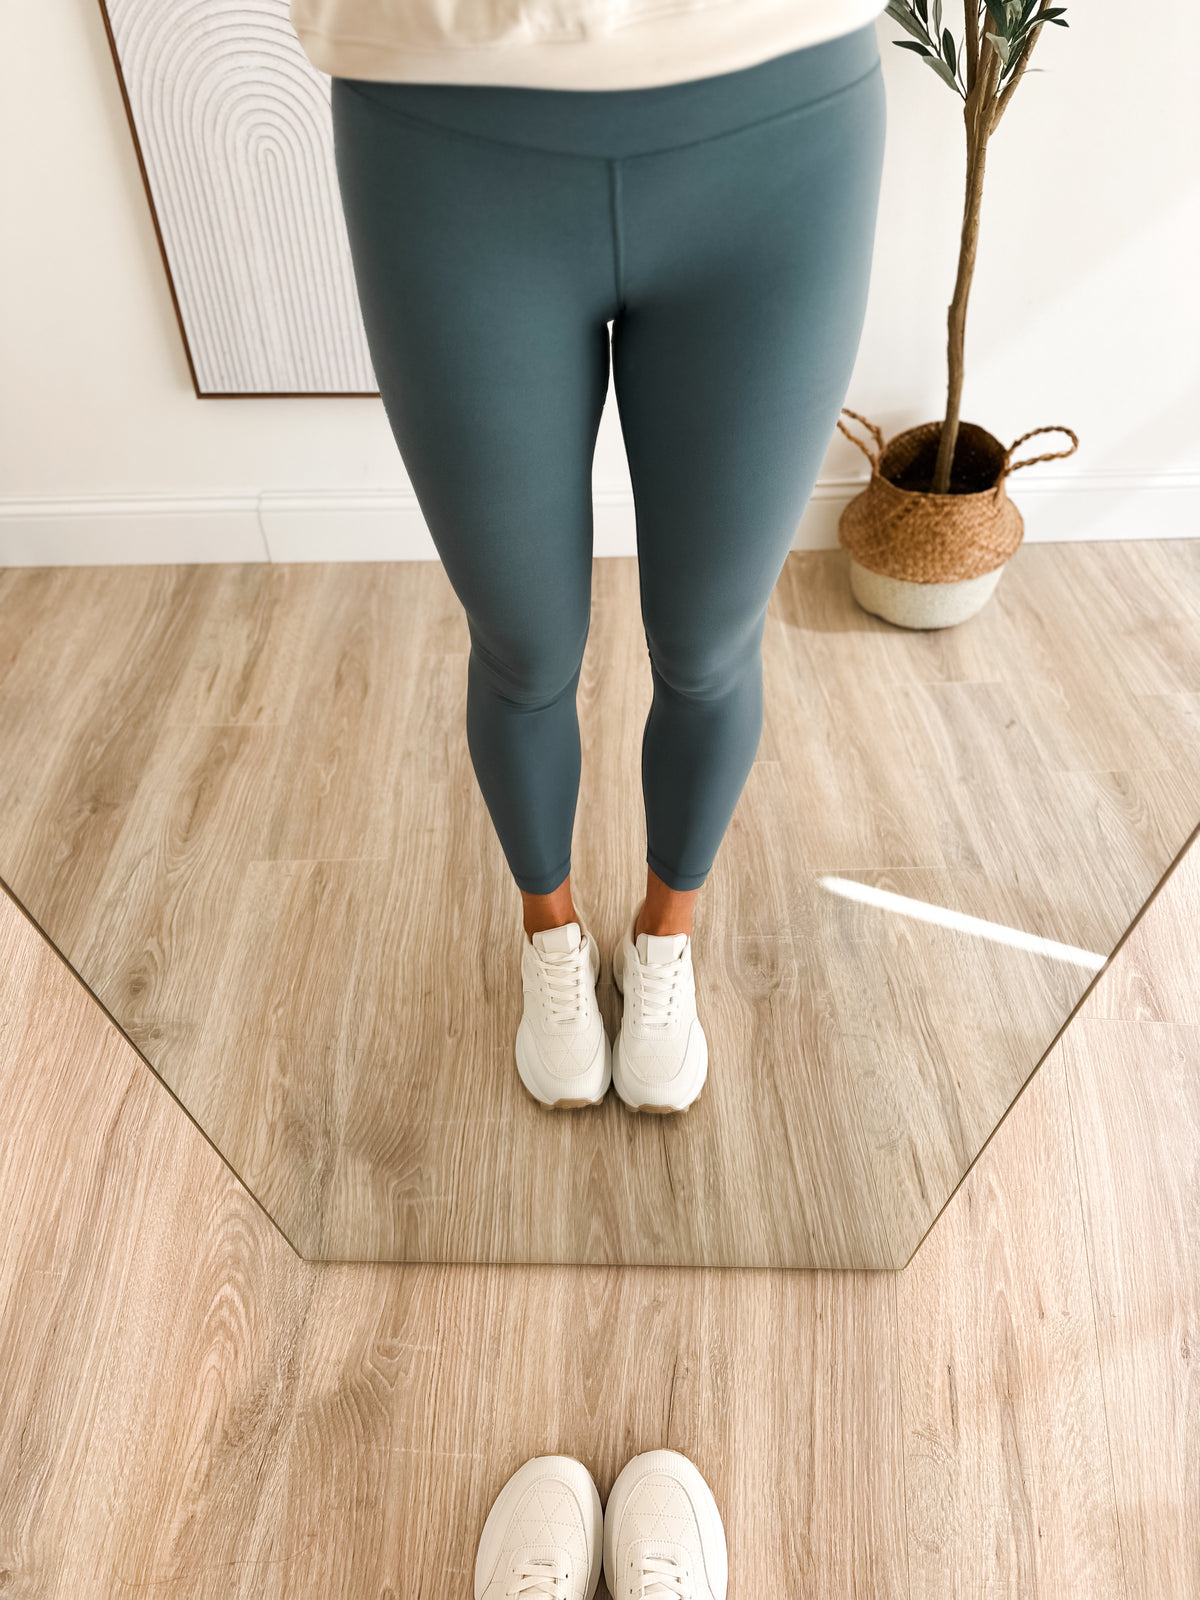 Mint Green Pastel Solid Color Block Spring Summer Leggings by